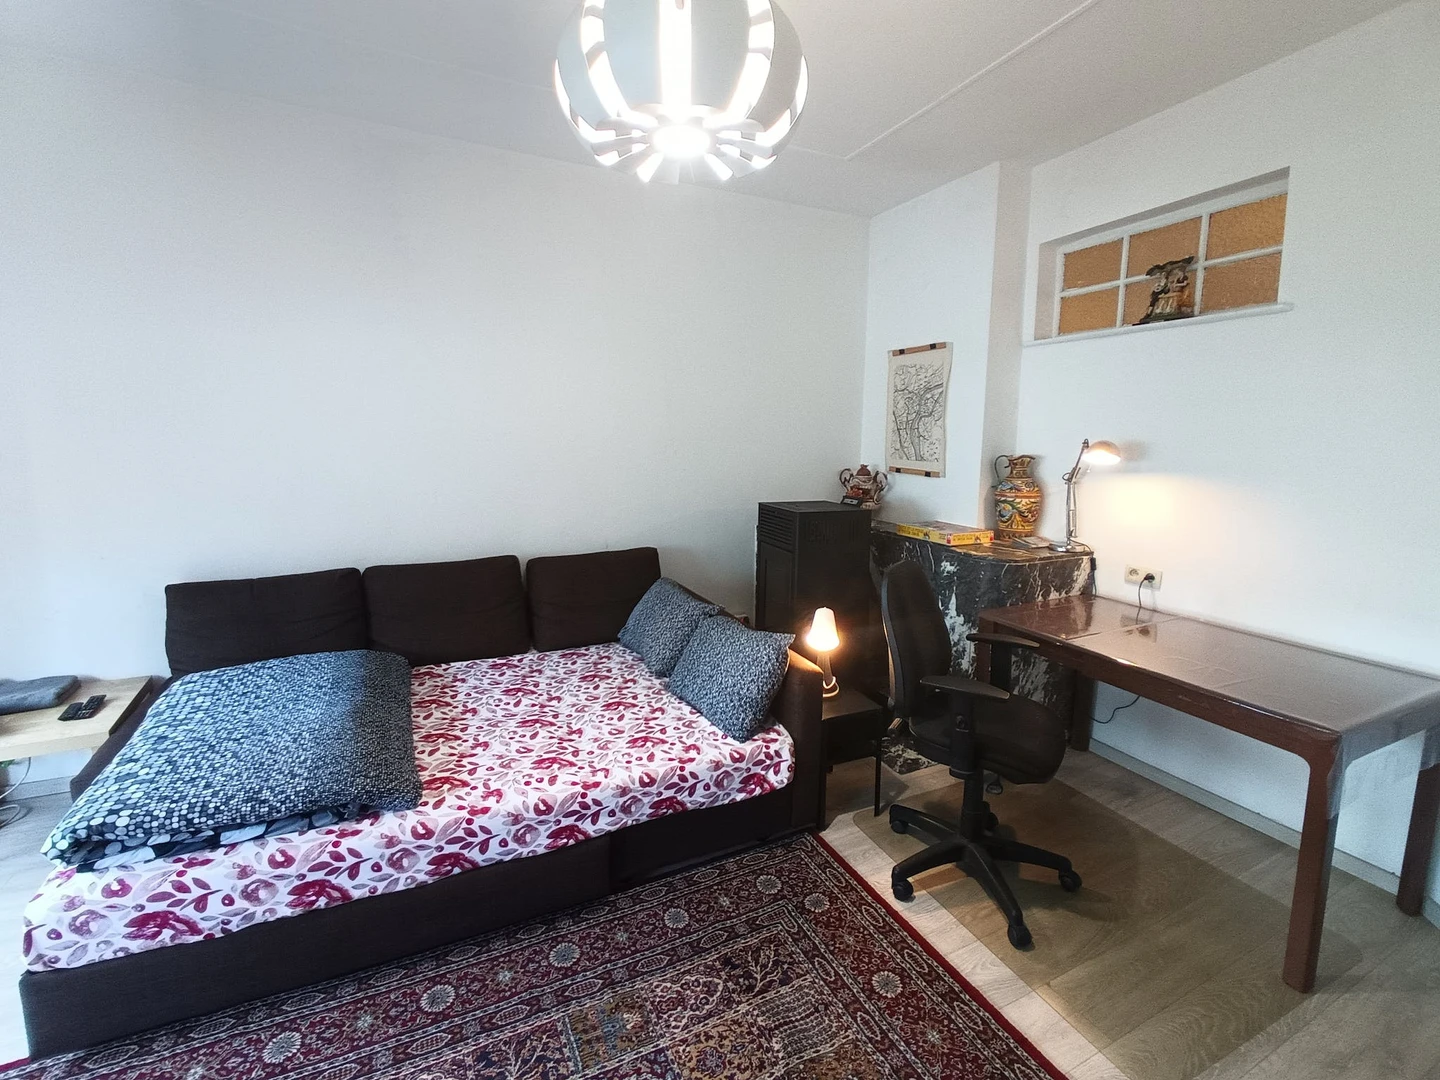 Room for rent with double bed Liège